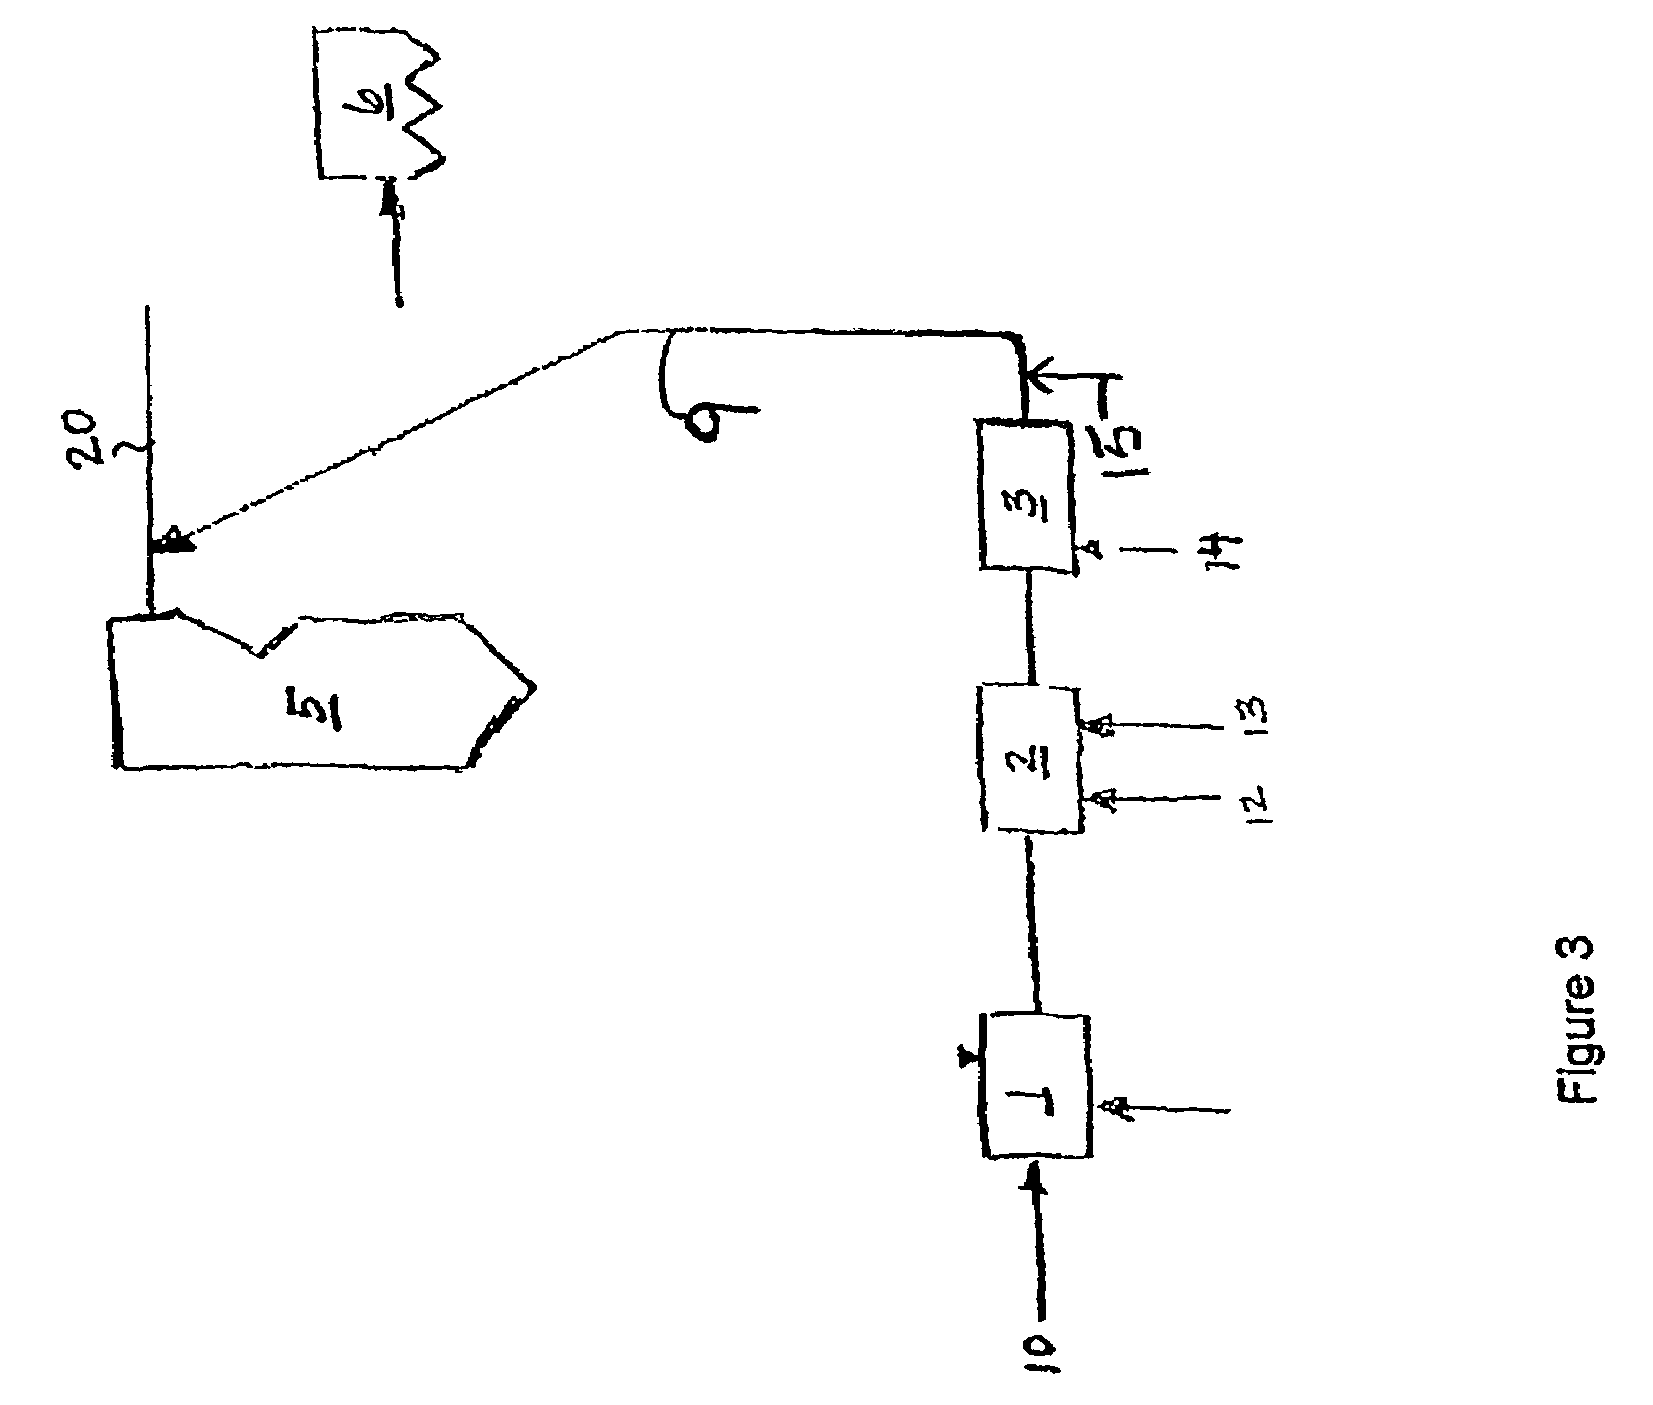 Production of activated char using hot gas